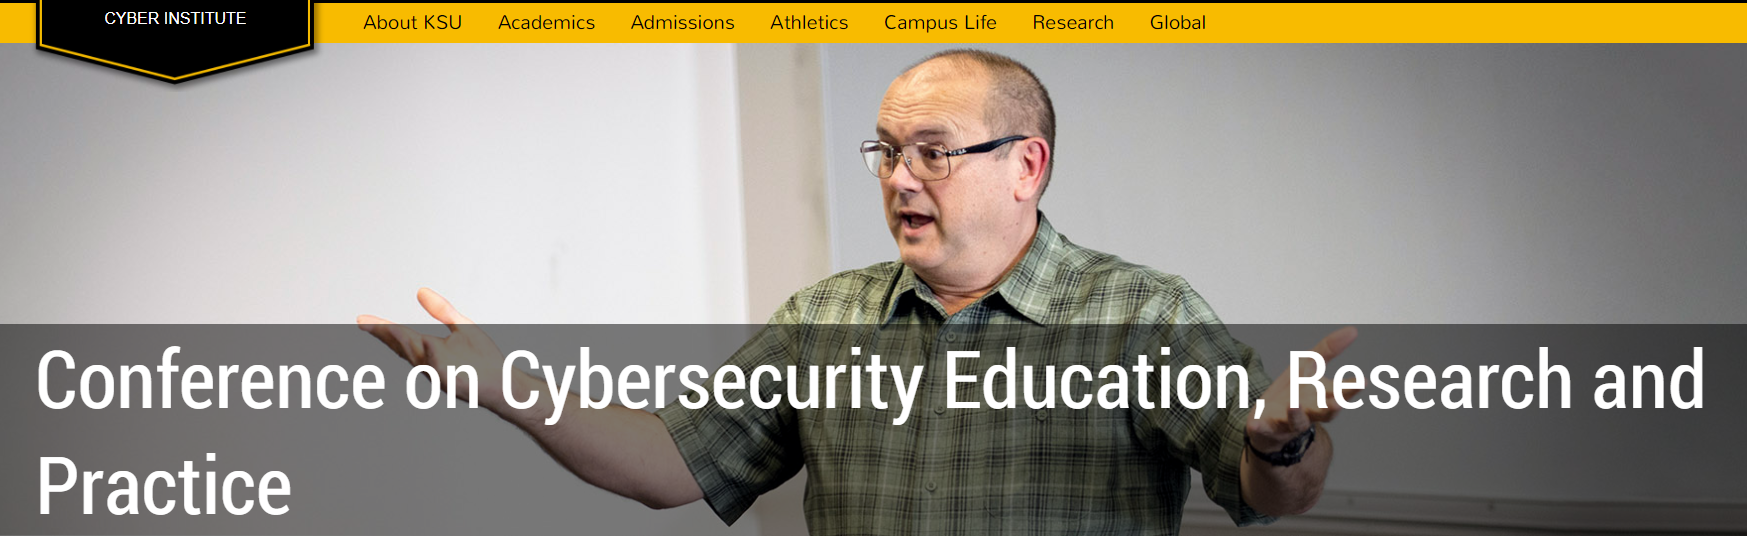 CCERP: Conference on Cybersecurity Education, Research, and Practice 2021